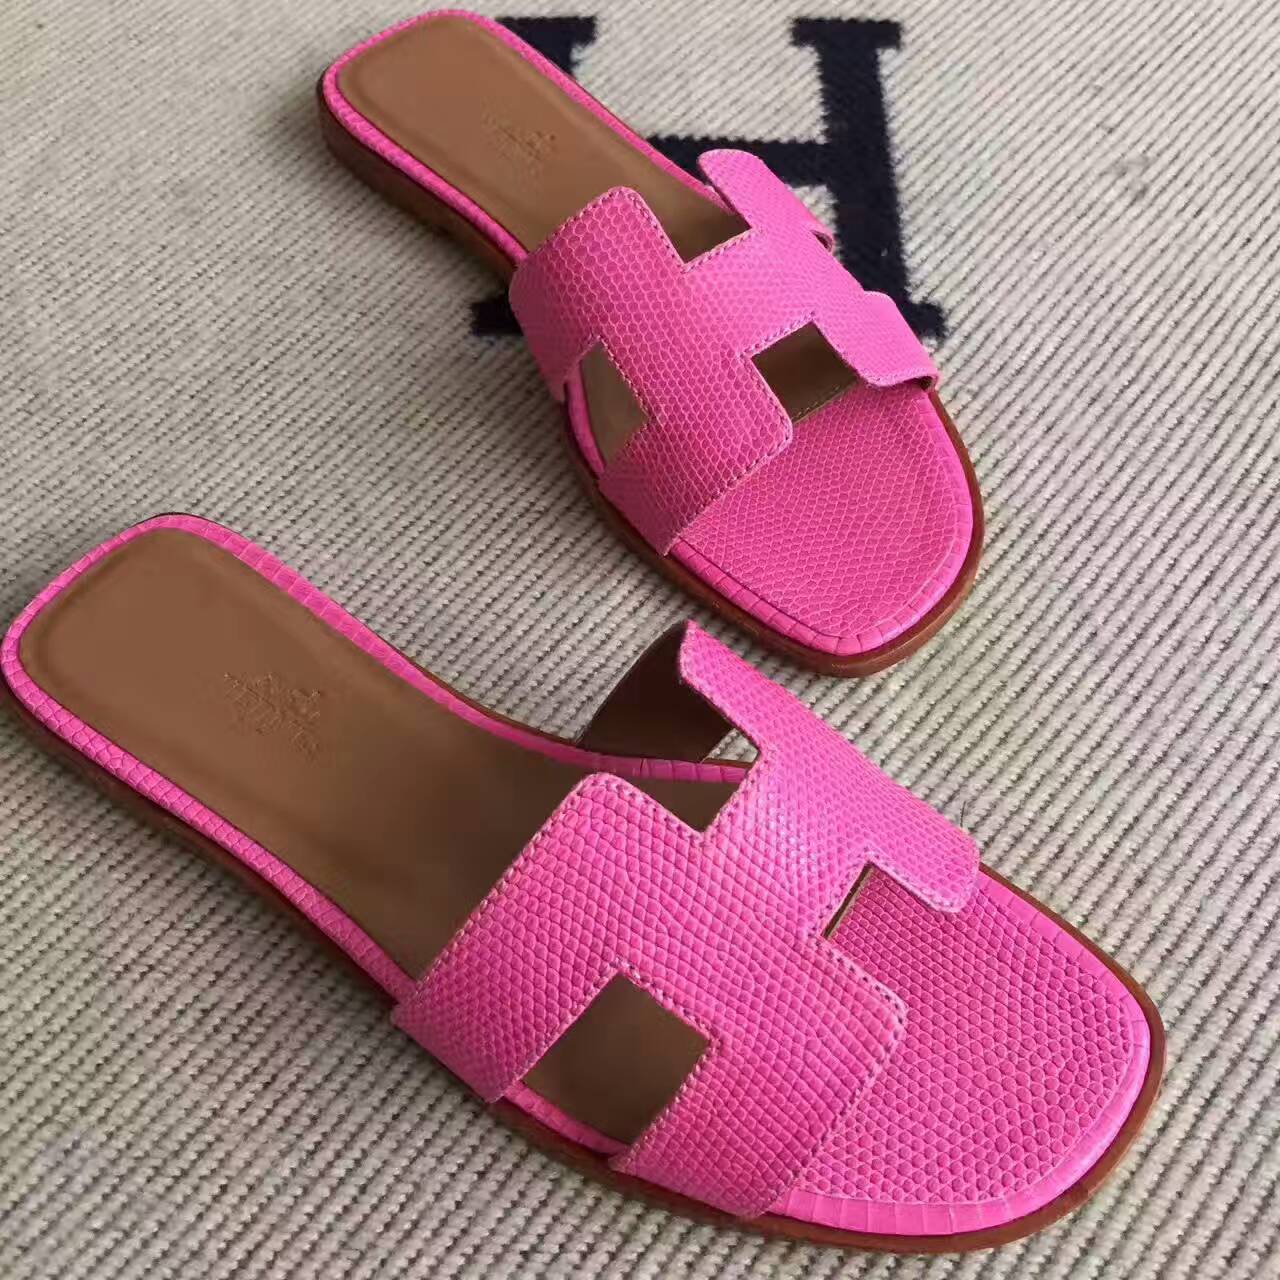 New Pretty Hermes Hot Pink Lizard Skin Sandals Shoes in 35-42#